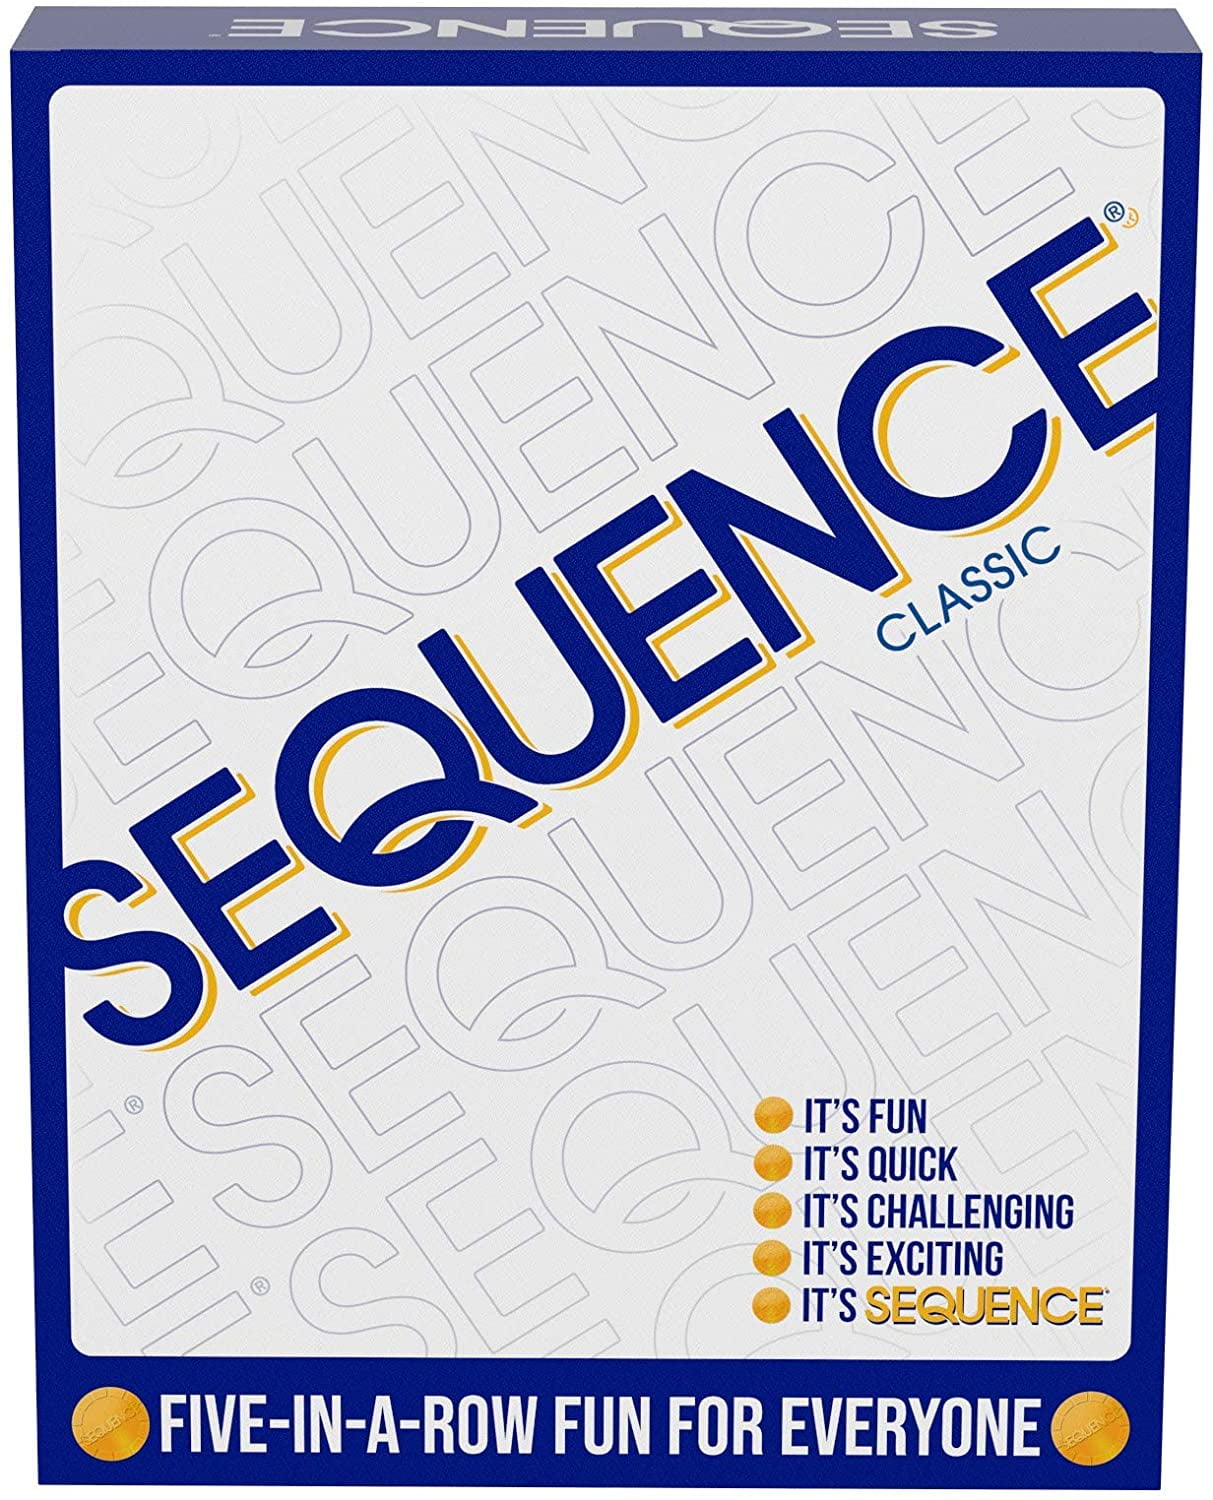 SEQUENCE- Original SEQUENCE Game with Folding Board, Cards and Chips by Jax  ( Packaging may Vary ) White, 10.3" x 8.1" x 2.31" - Walmart.com